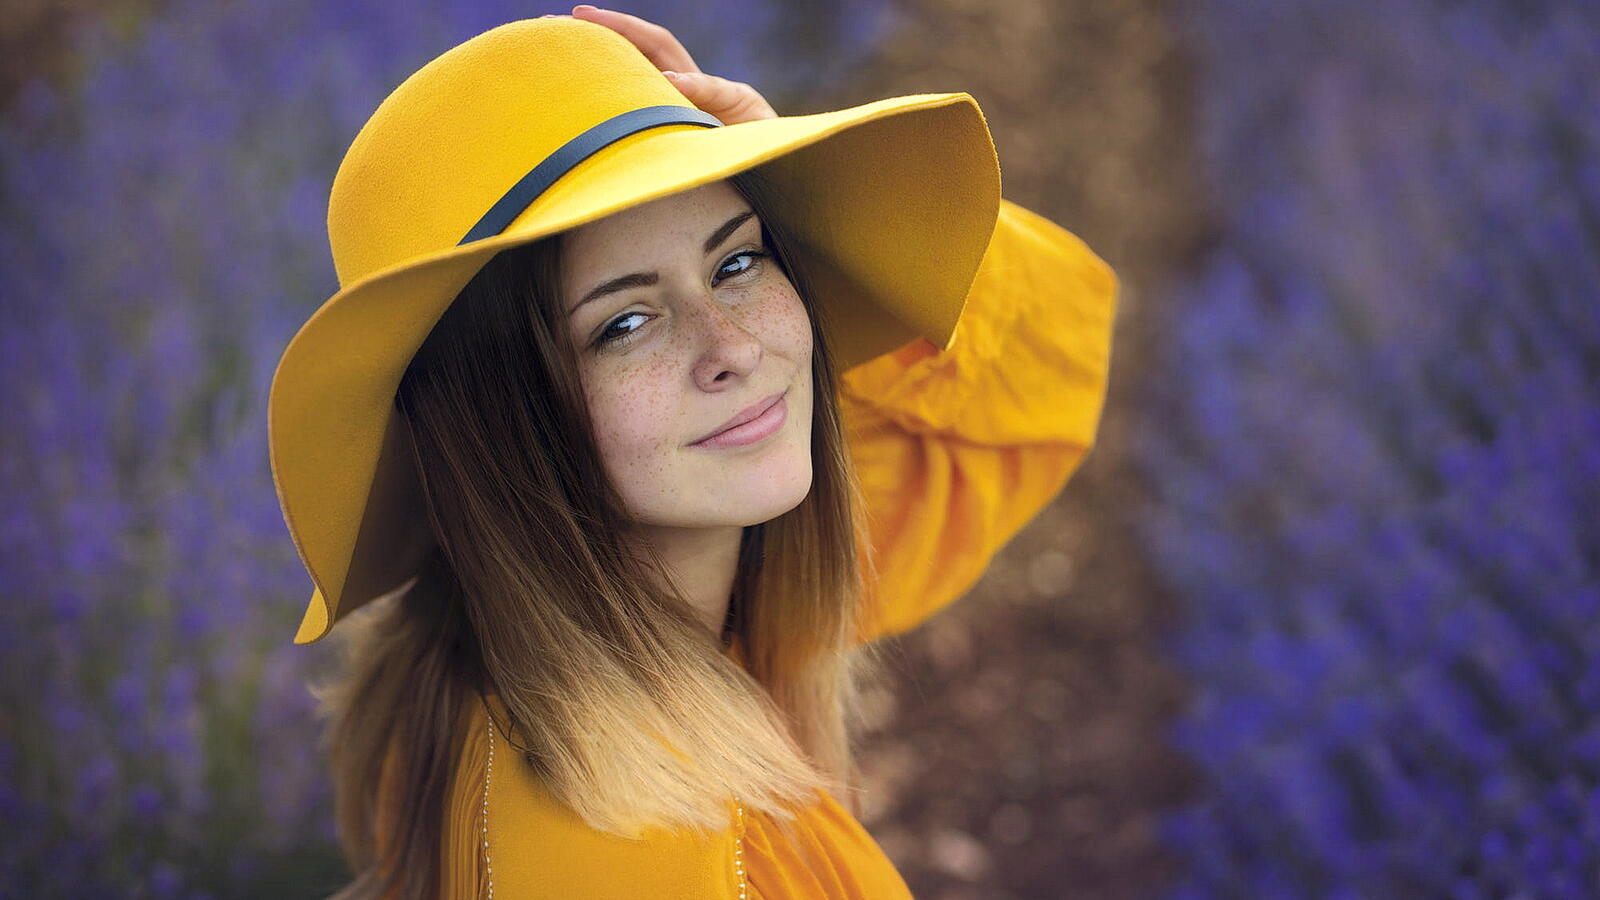 Free photo A skinny girl in a yellow suit with a yellow hat